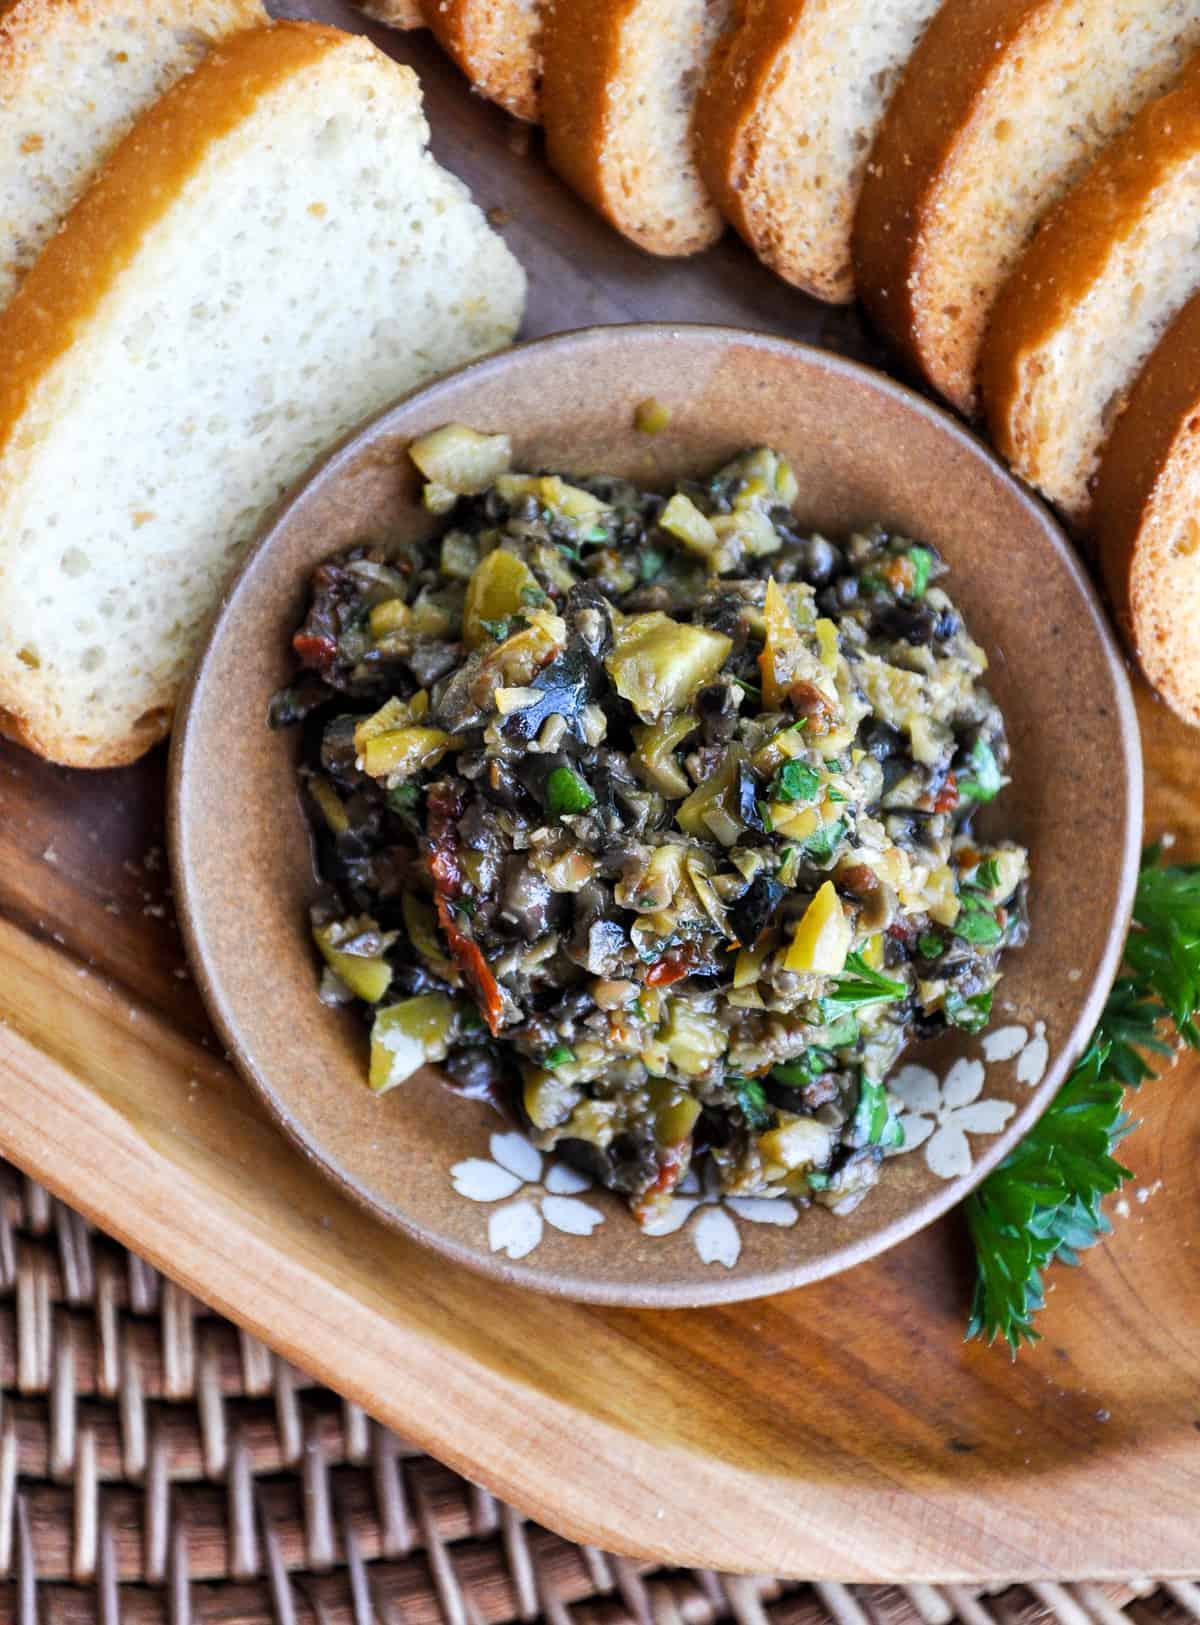 Quick Olive Tapenade using black and green California olives! So quick and easy, you will never buy tapenade from the store again!